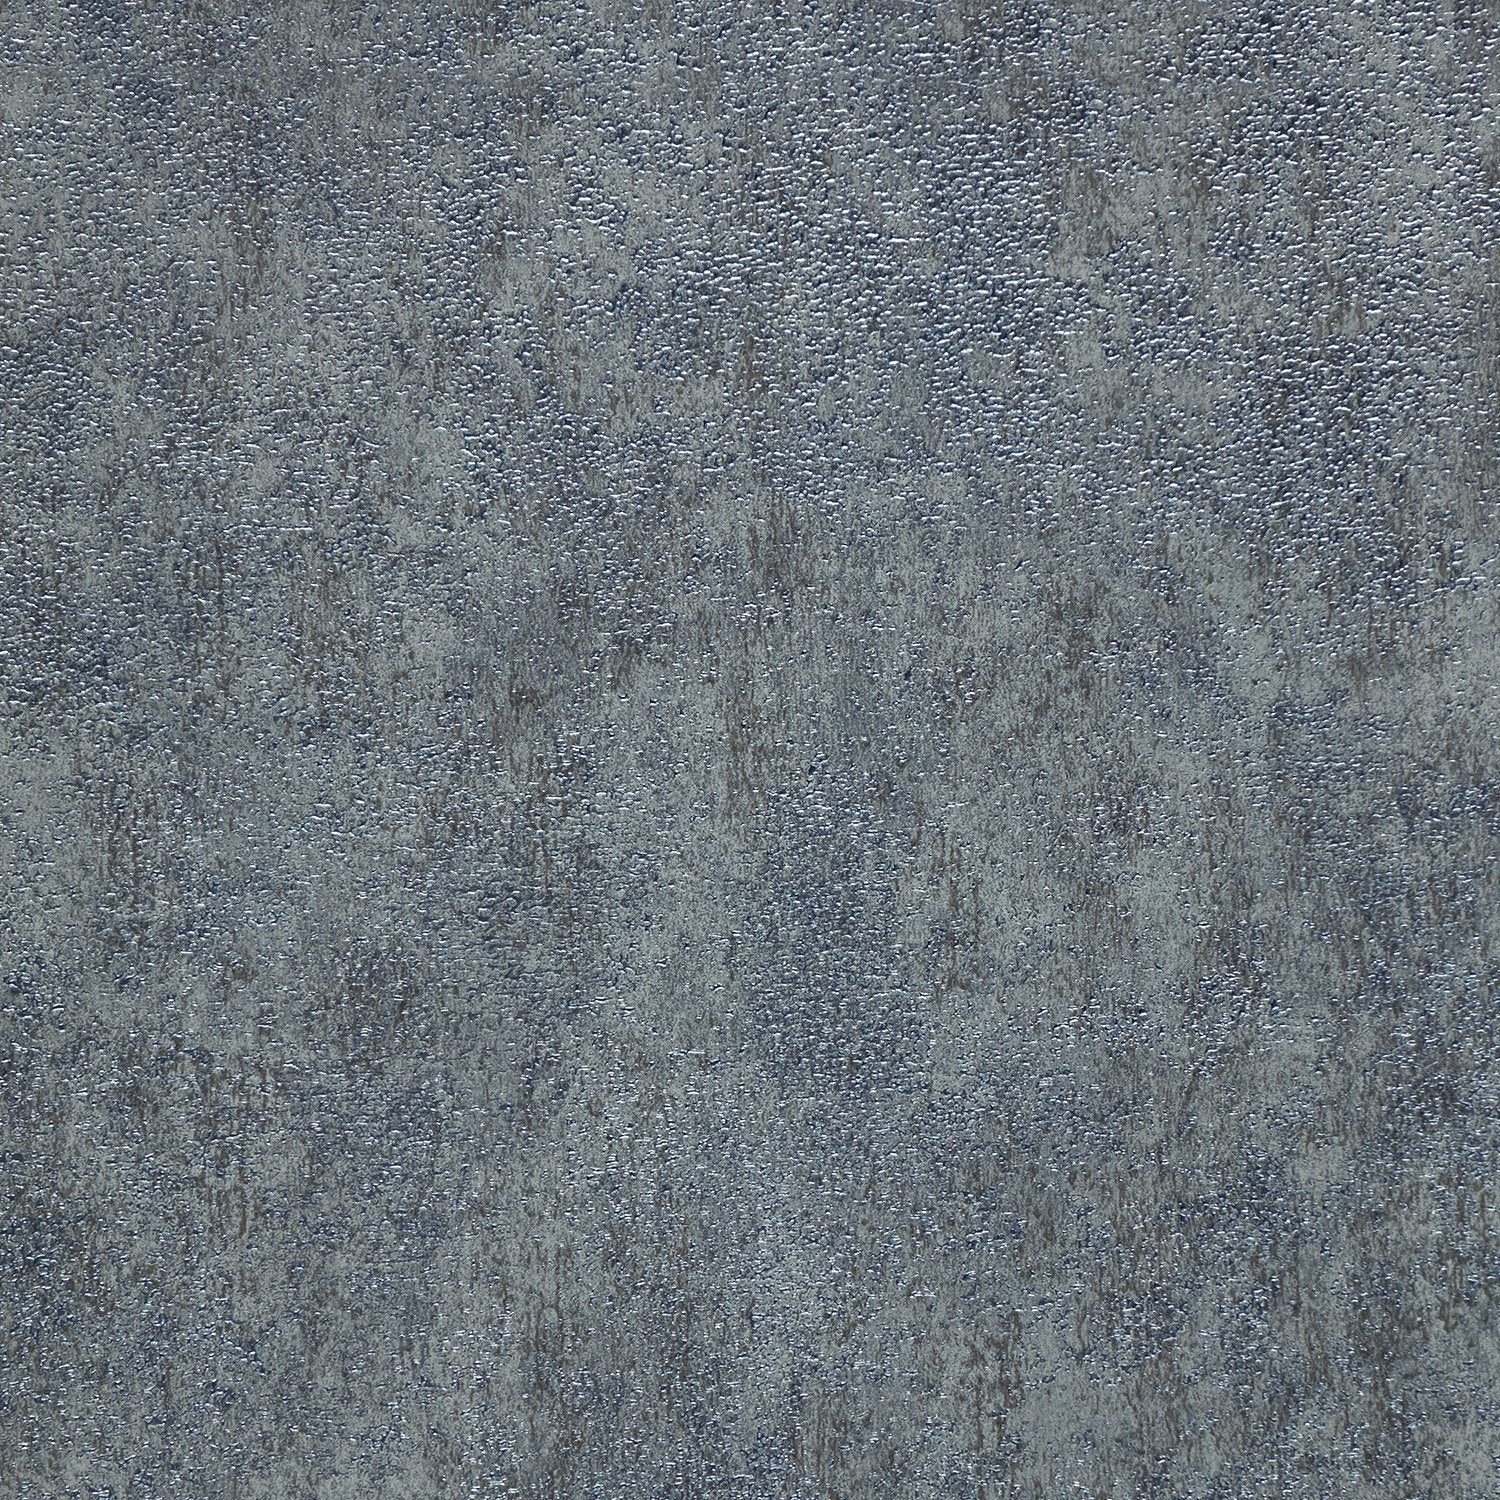 Patina Stone - Y47479 - Wallcovering - Vycon - Kube Contract